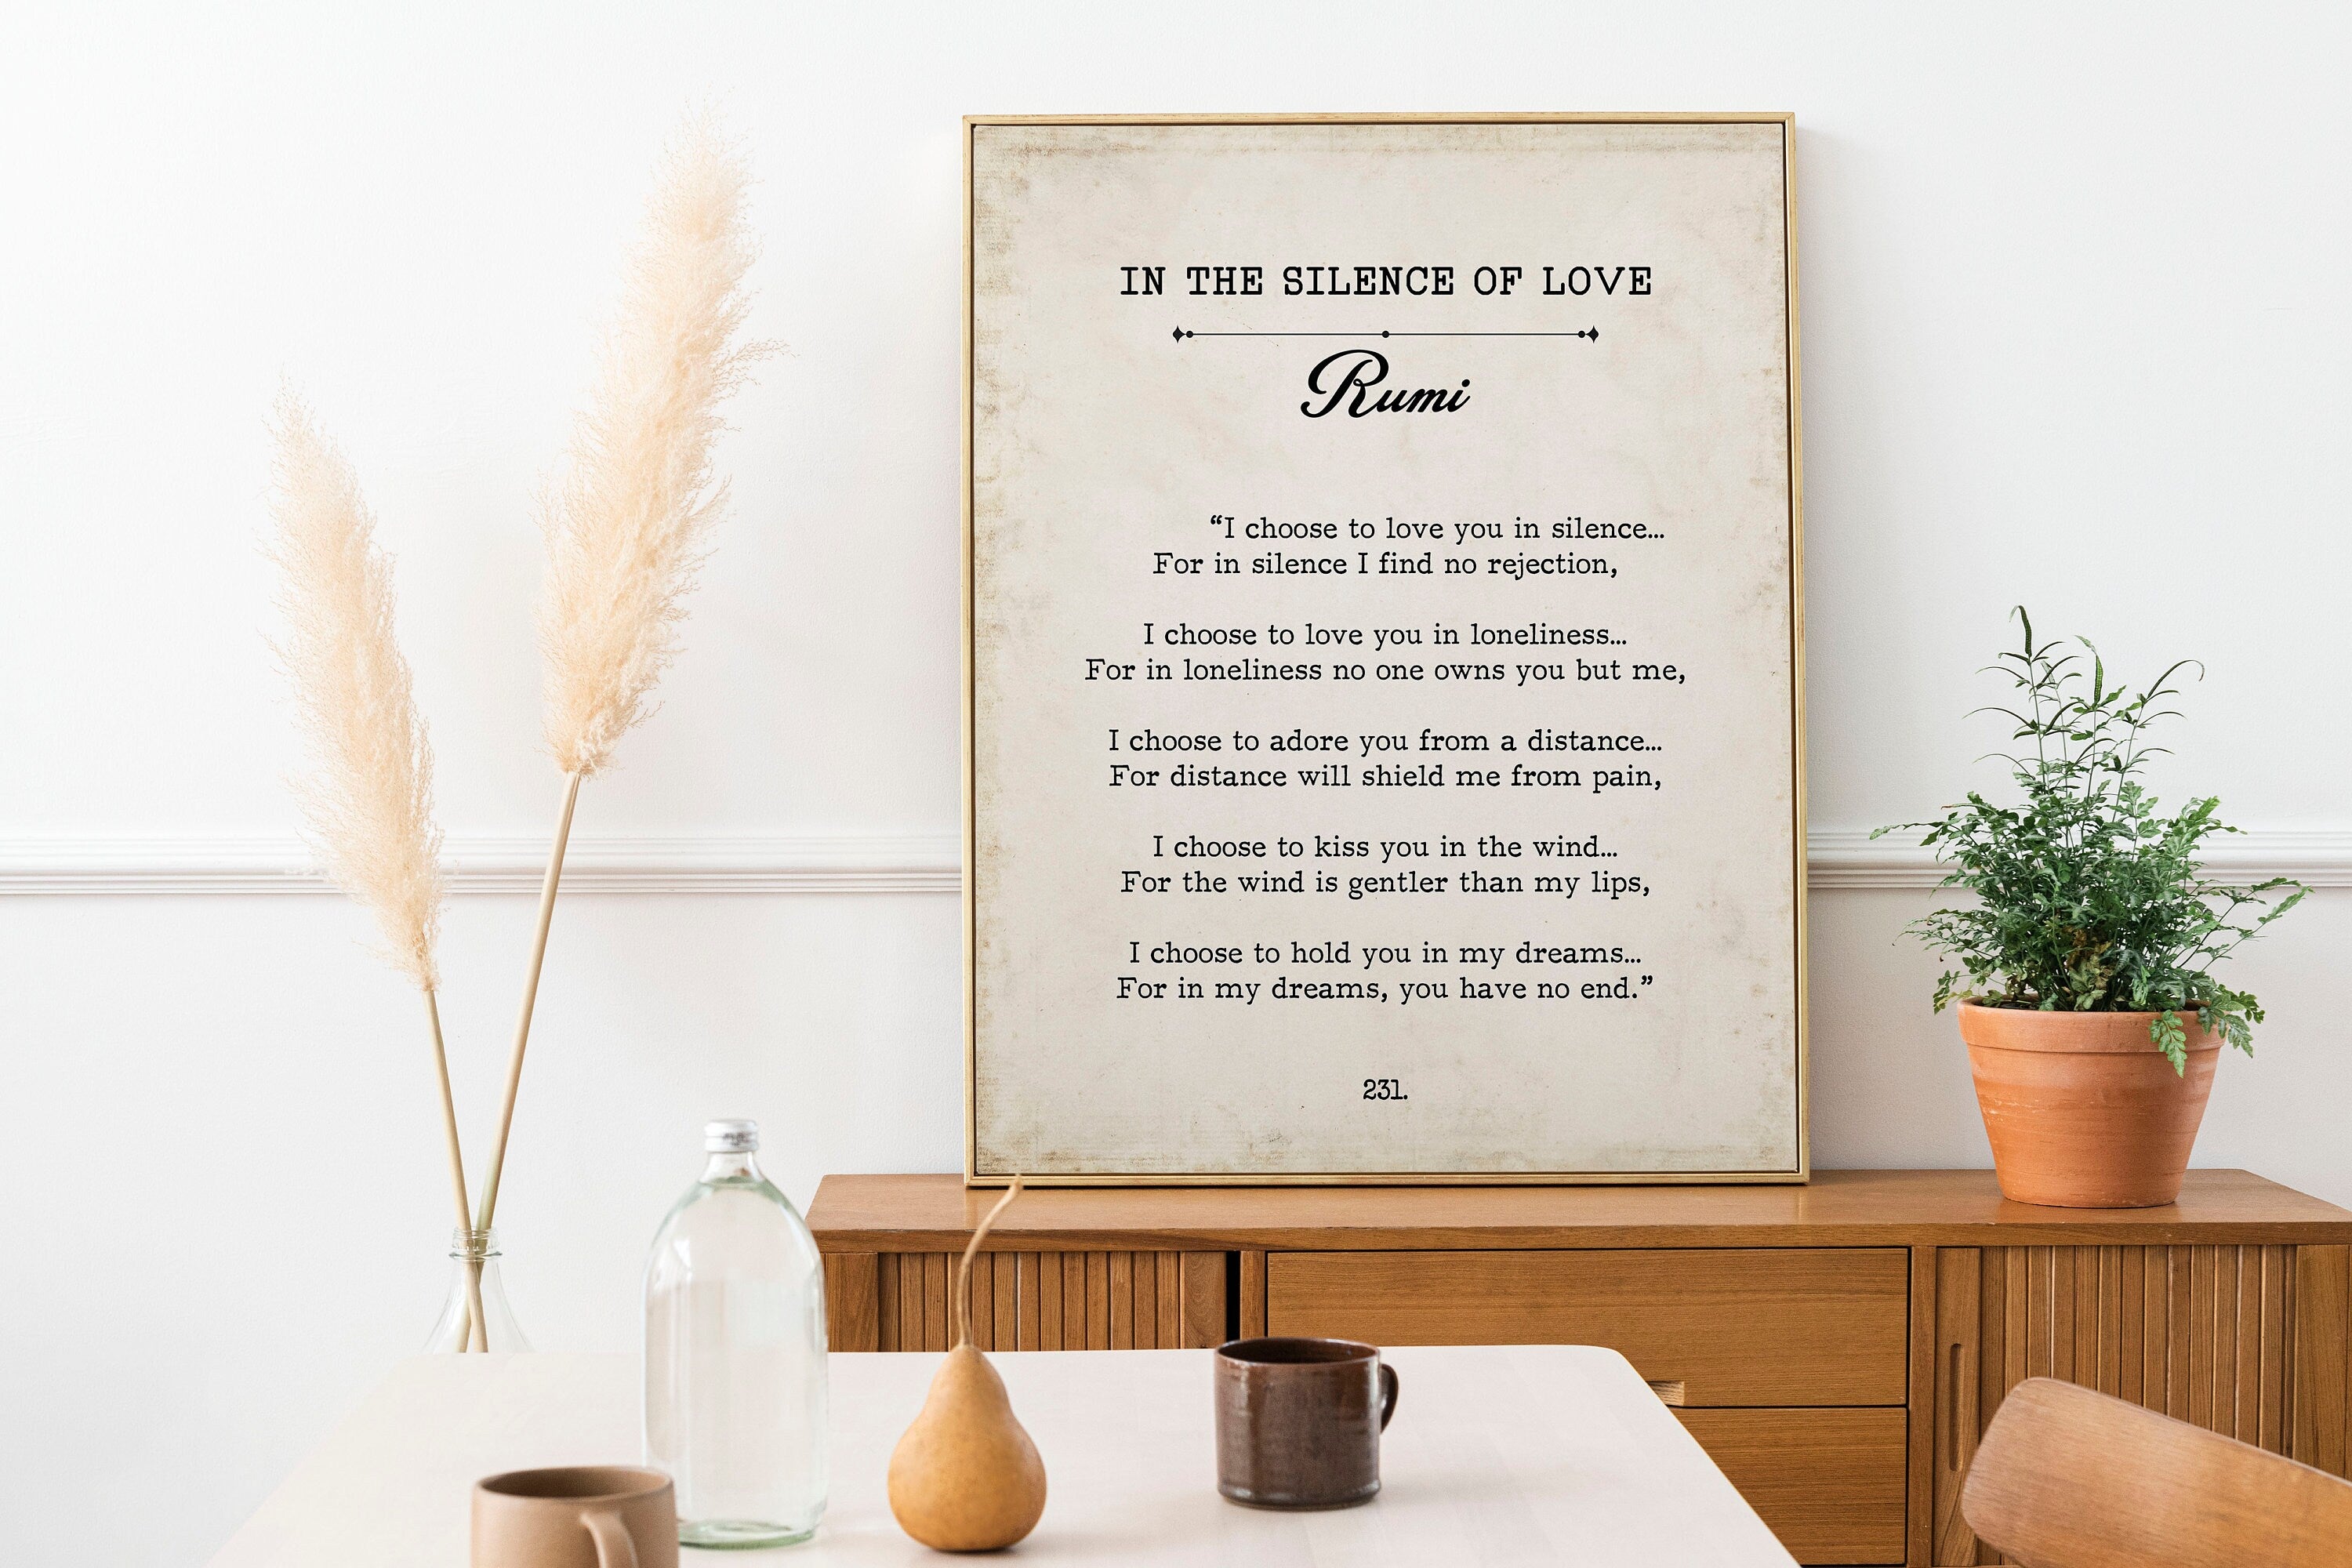 Rumi - I Choose To Love You In Silence Book Page Wall Art Print, Vintage Style Wall Decor, In The Silence Of Love Unframed and Framed Art